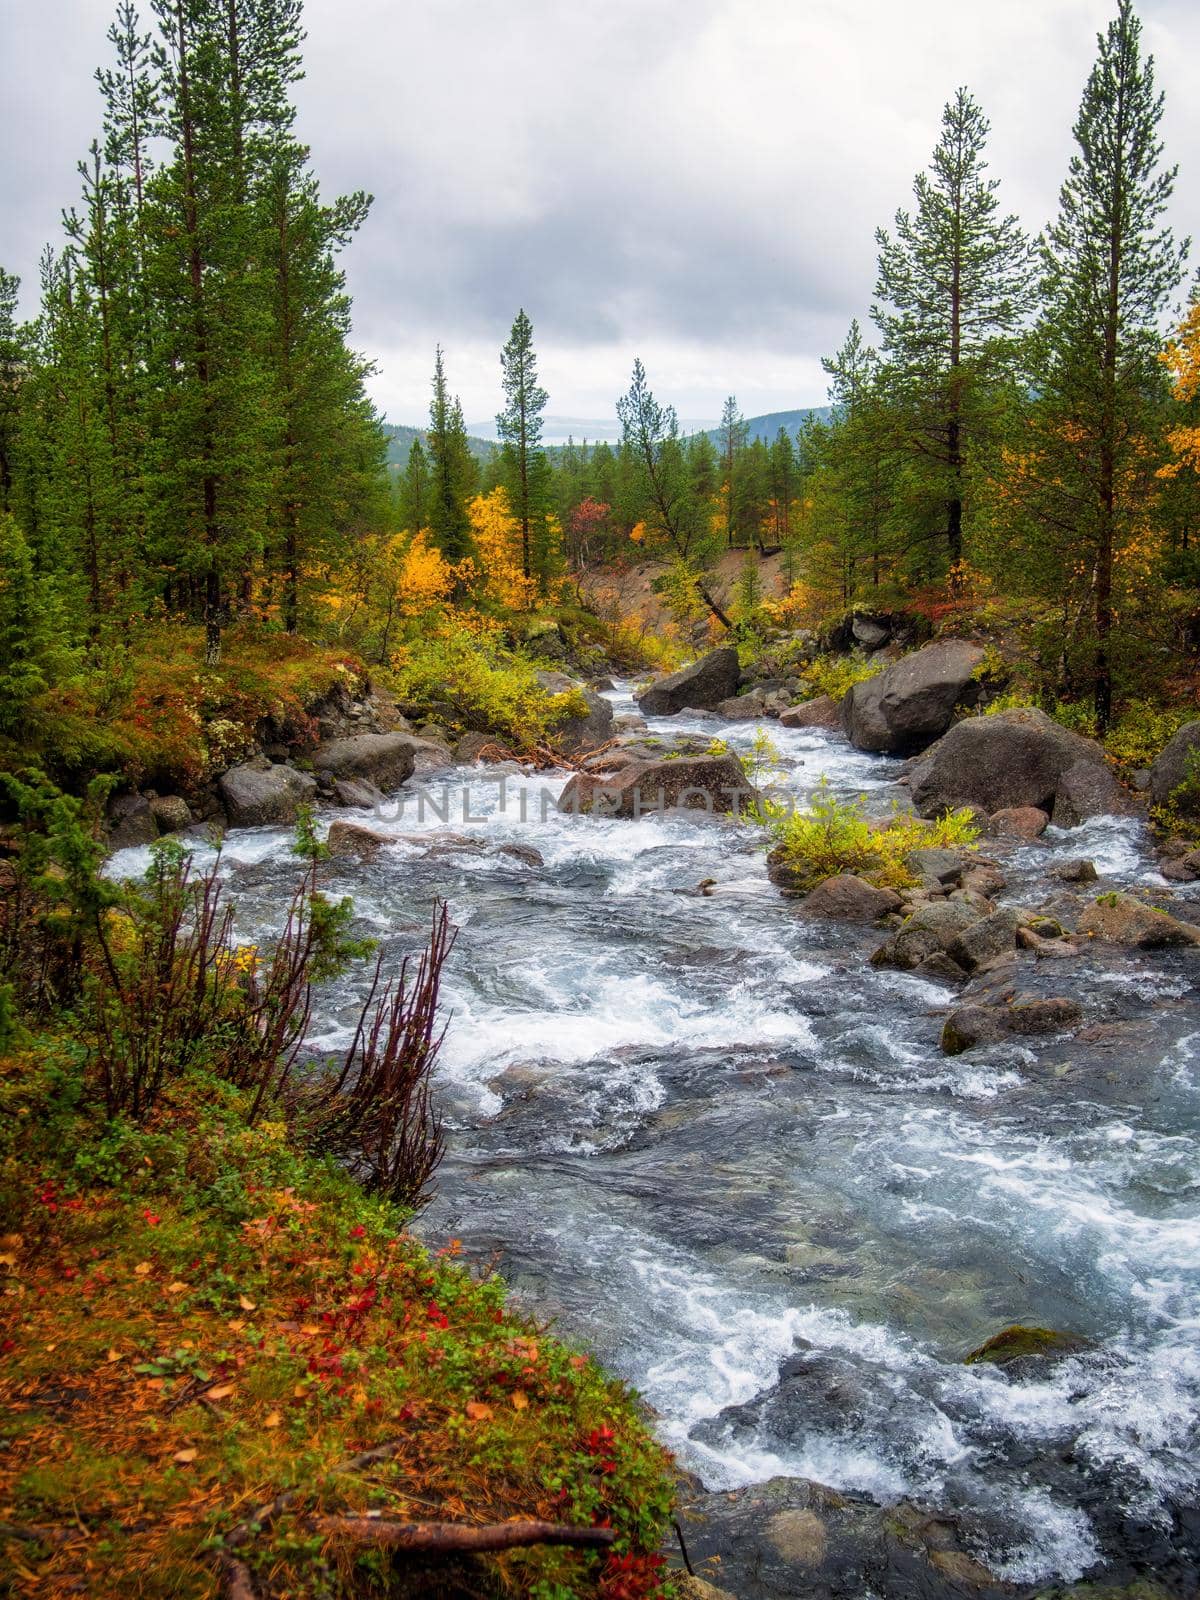 River in the Khibiny mountains in autumn. Autumn landscape.